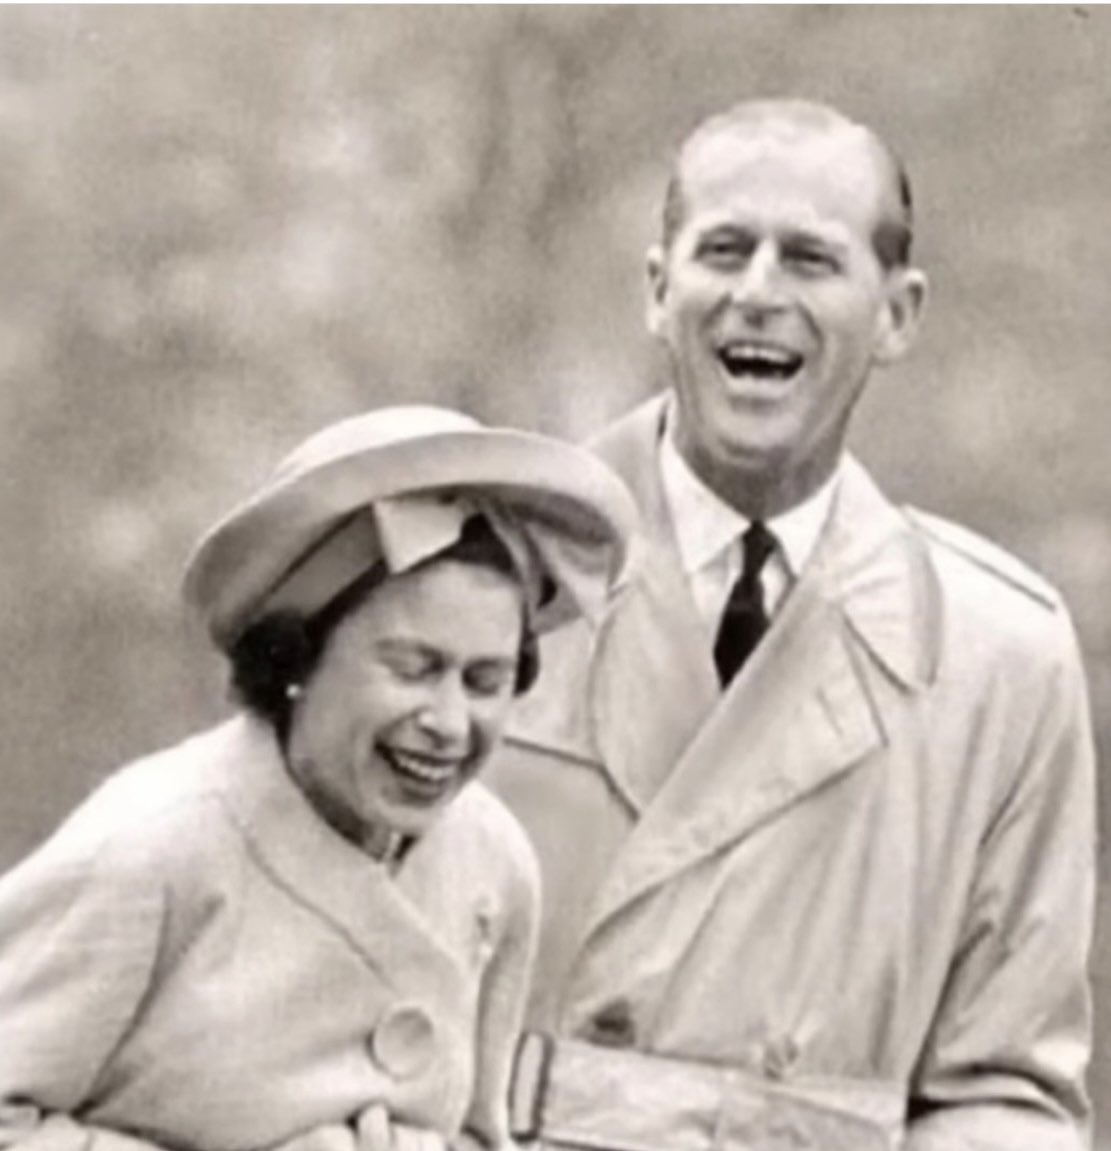 Queen Elizabeth and her Strength and Stay Prince Phillip. 
Look at that hearty laugh. I would love to know what they were giggling at. It’s warmed my heart today. 
#QueenElizabethII #PrincePhillip #TrueLove